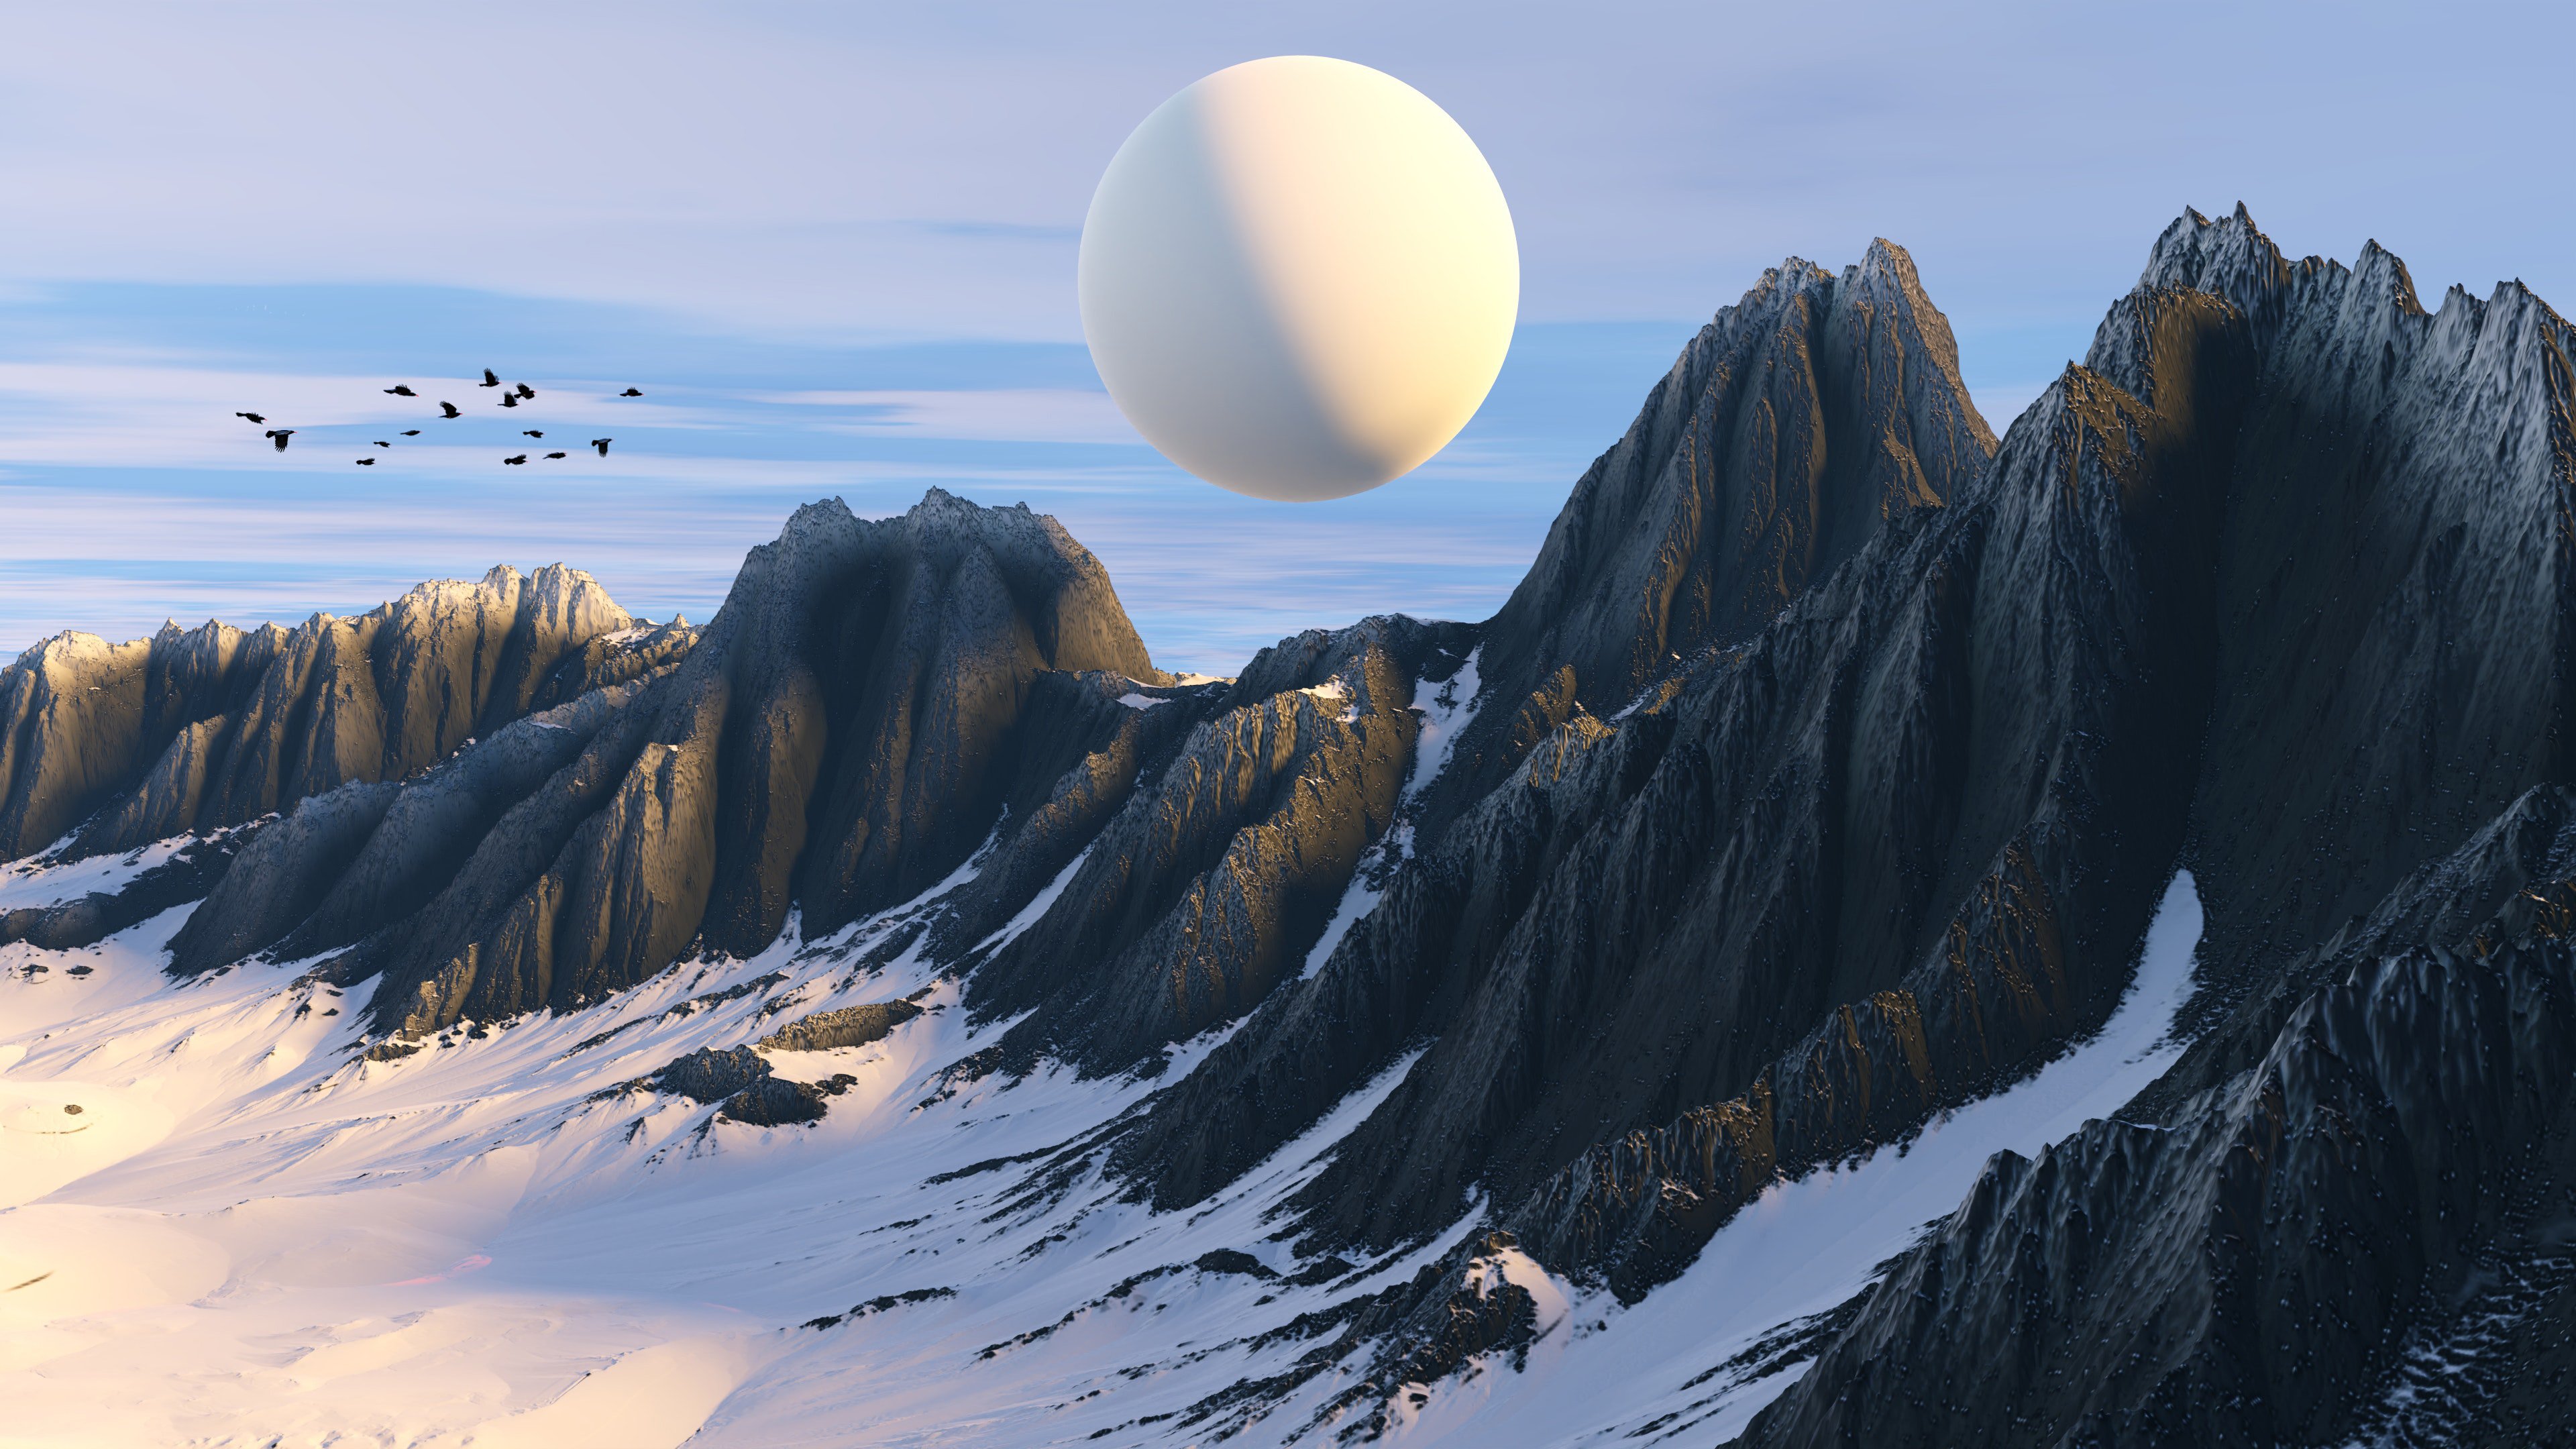 Wallpaper Mountains with planet upclose 3D Illustration